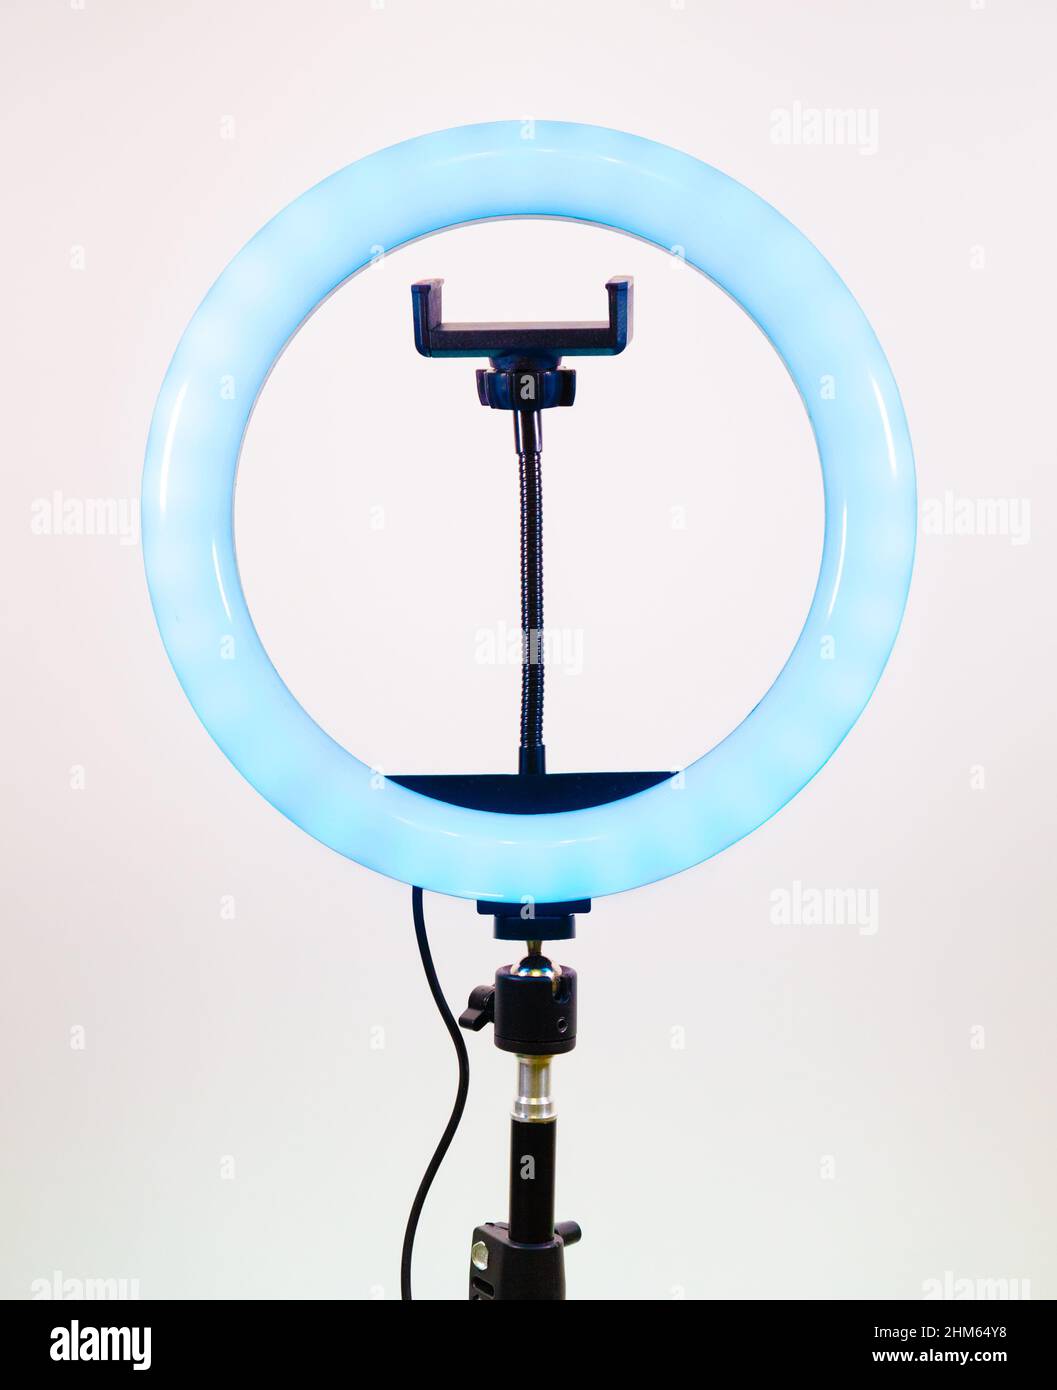 Ring lamp with a smartphone holder. Blue light. Stock Photo